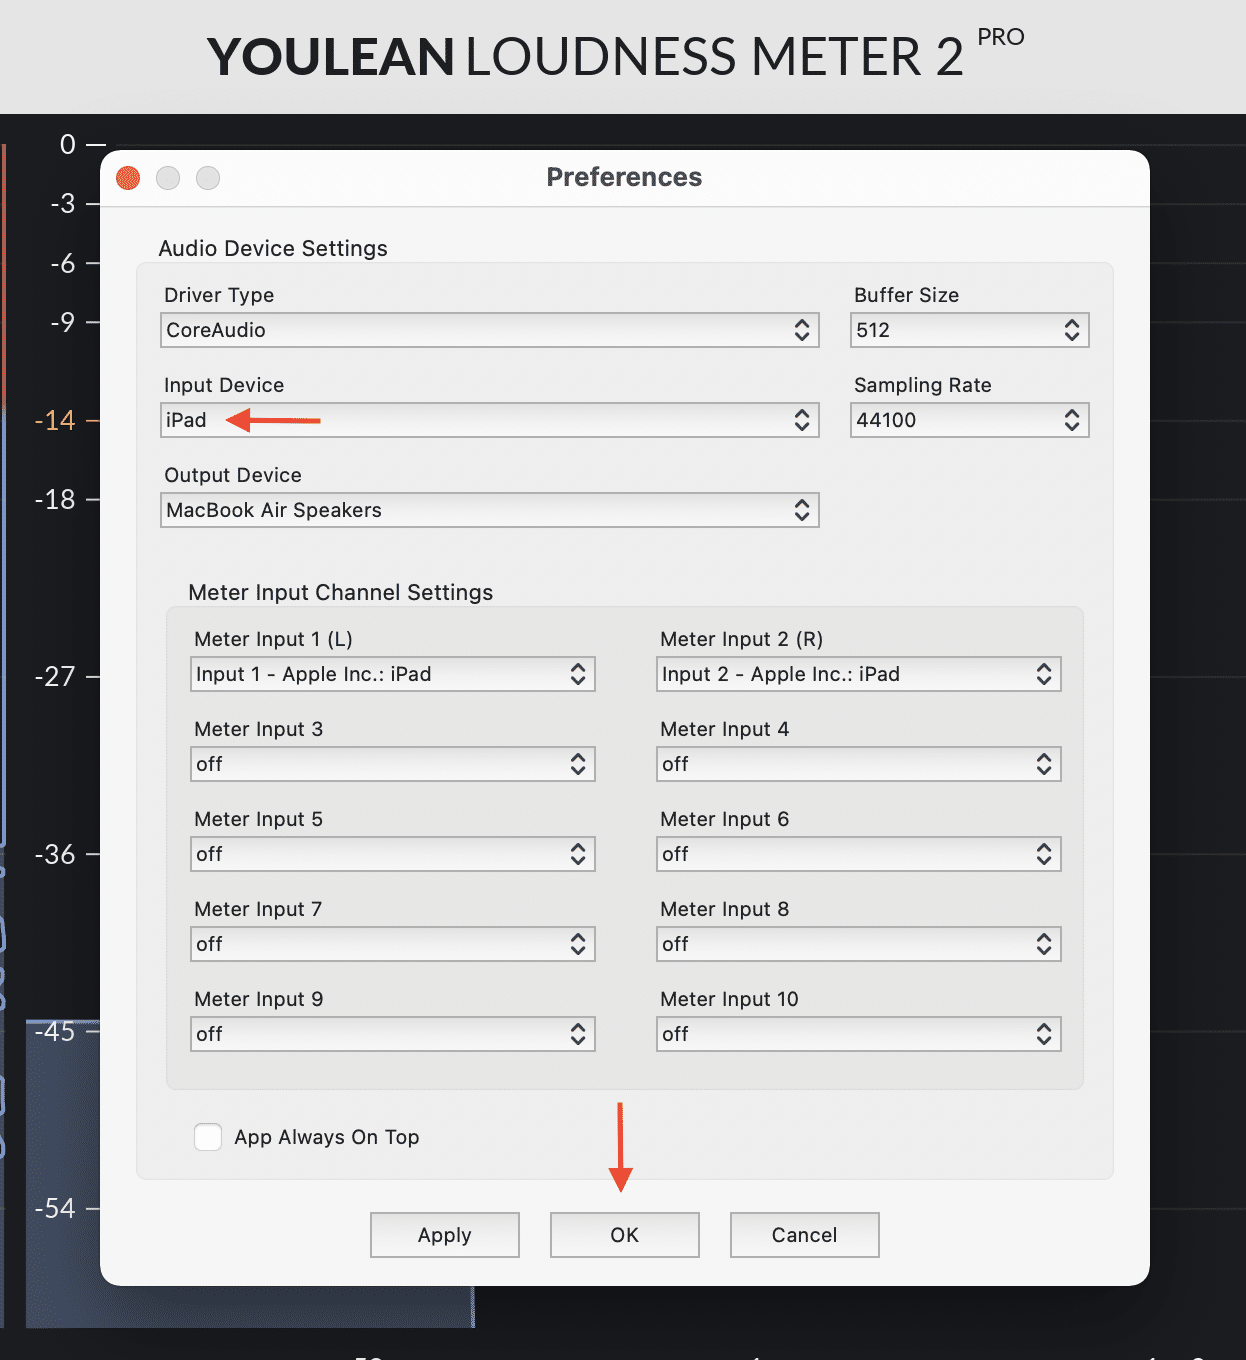 Set iPad as an input source inside Youlean Loudness Meter 2 Pro